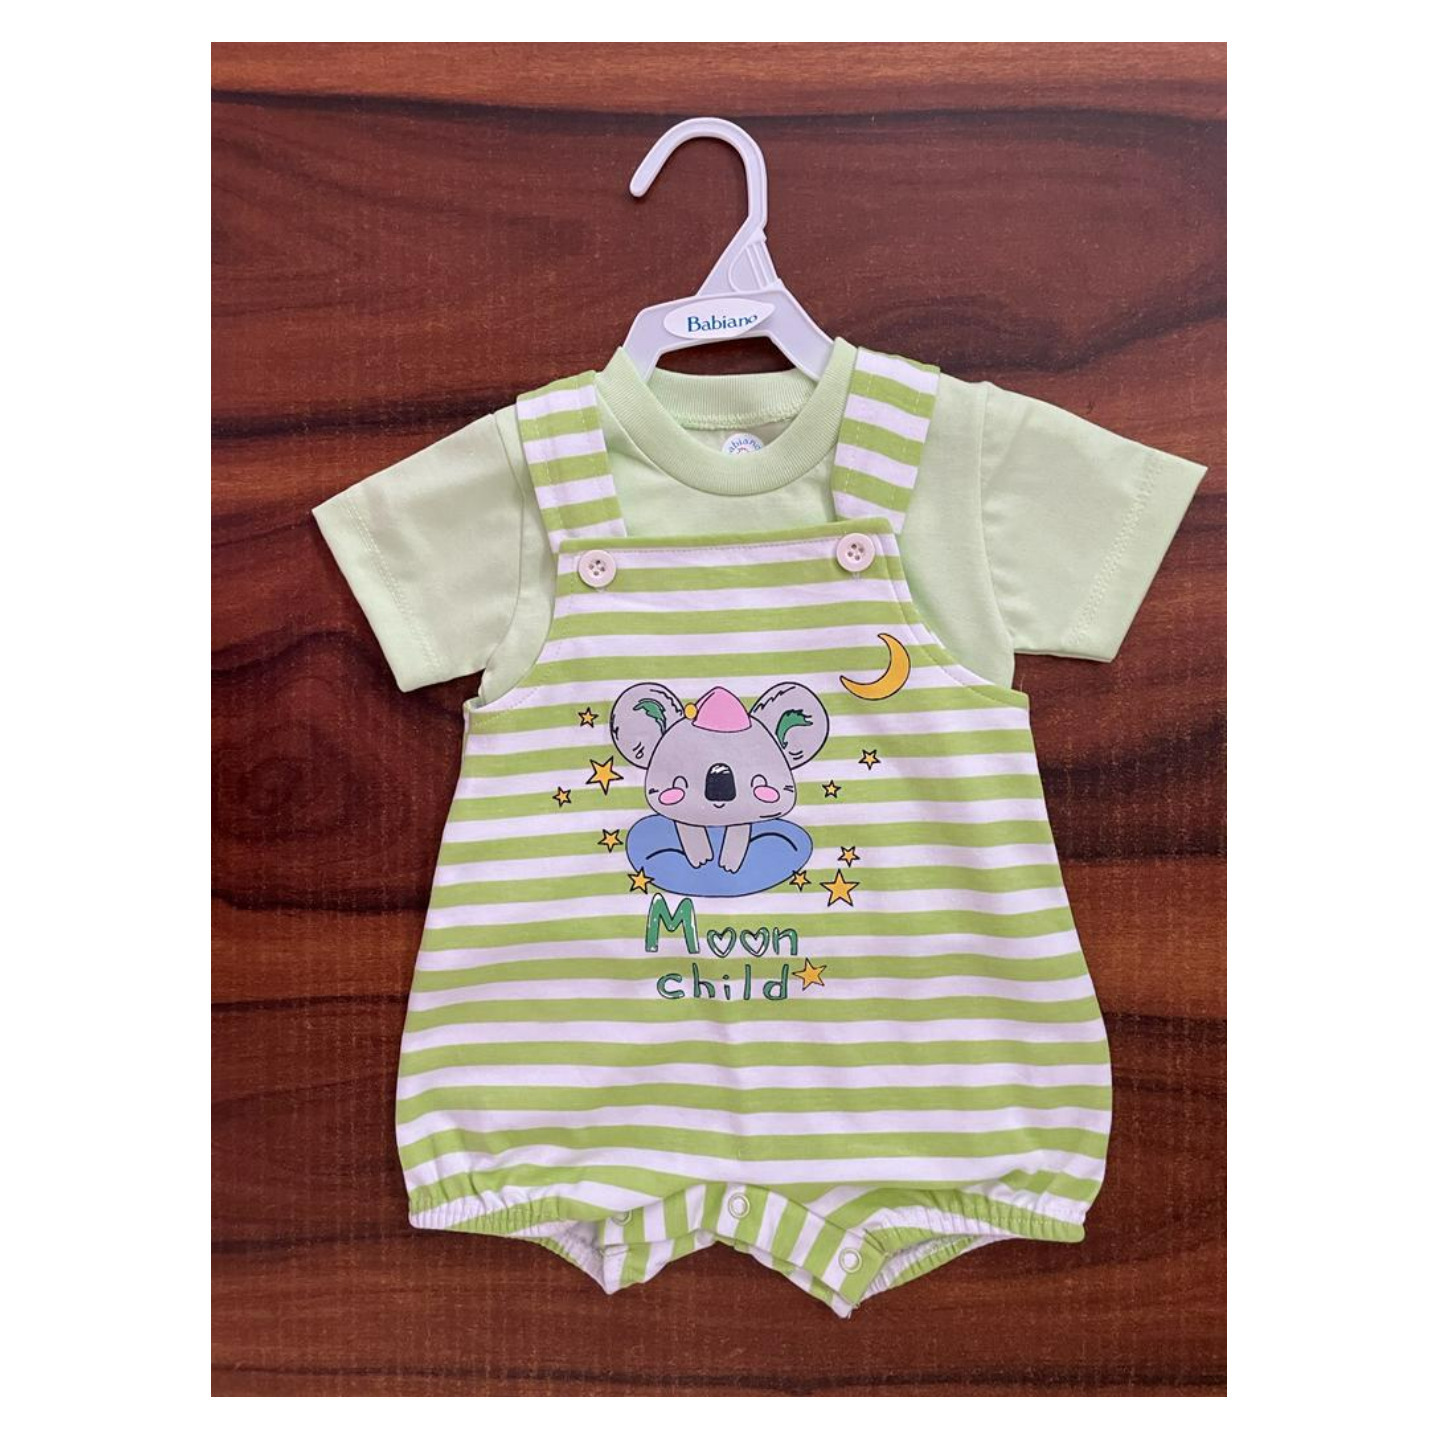 Babiano Moon Child Romper Rs 595 Only Made In India NB to 1 Year size